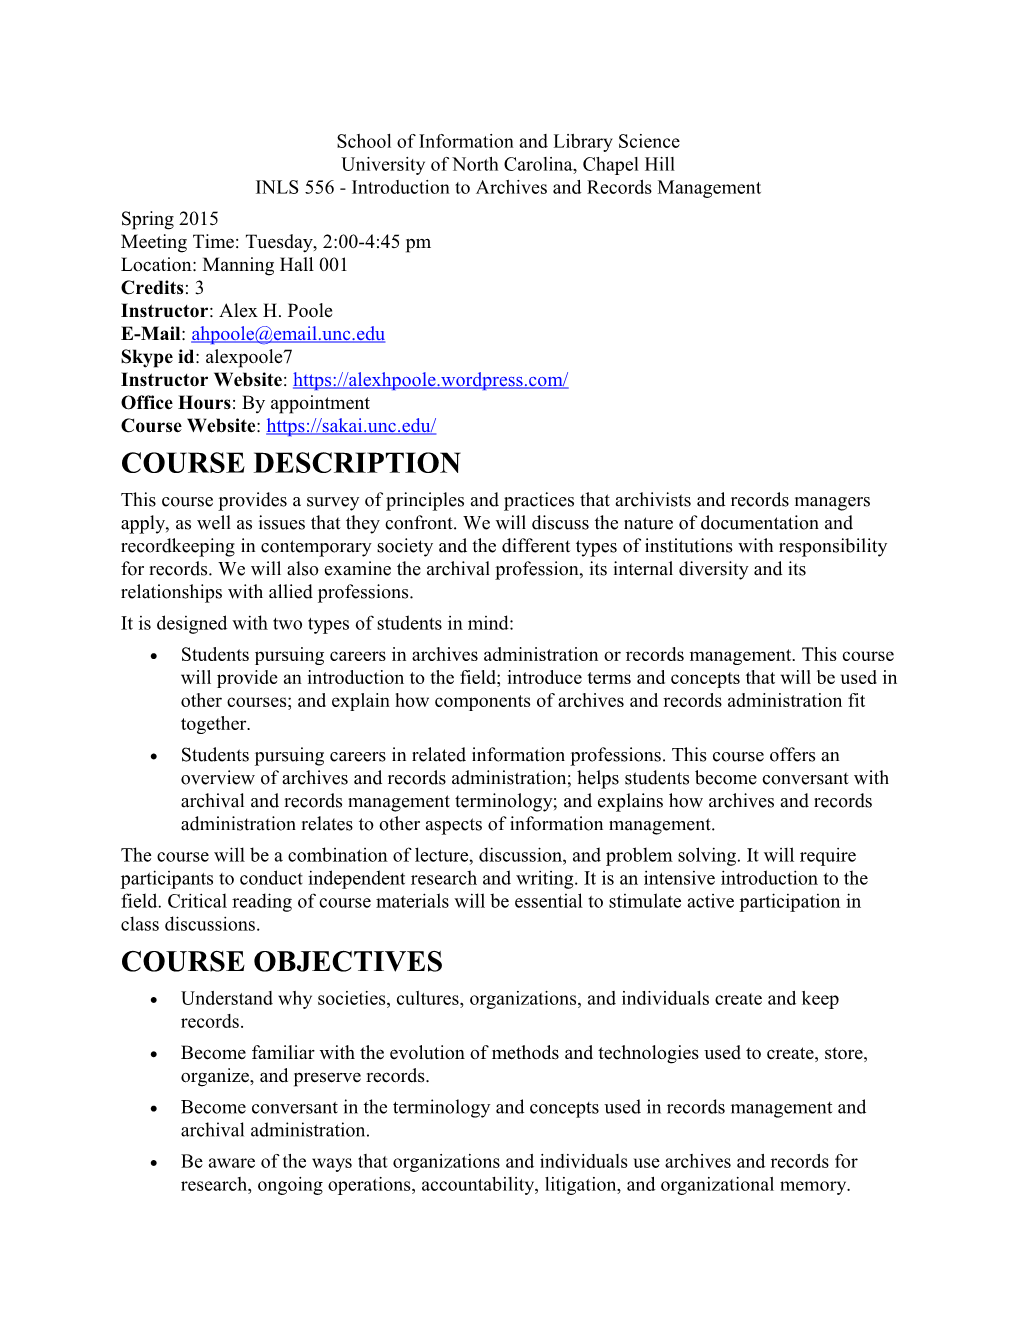 INLS 556 - Introduction to Archives and Records Management - Fall 2012 Syllabus